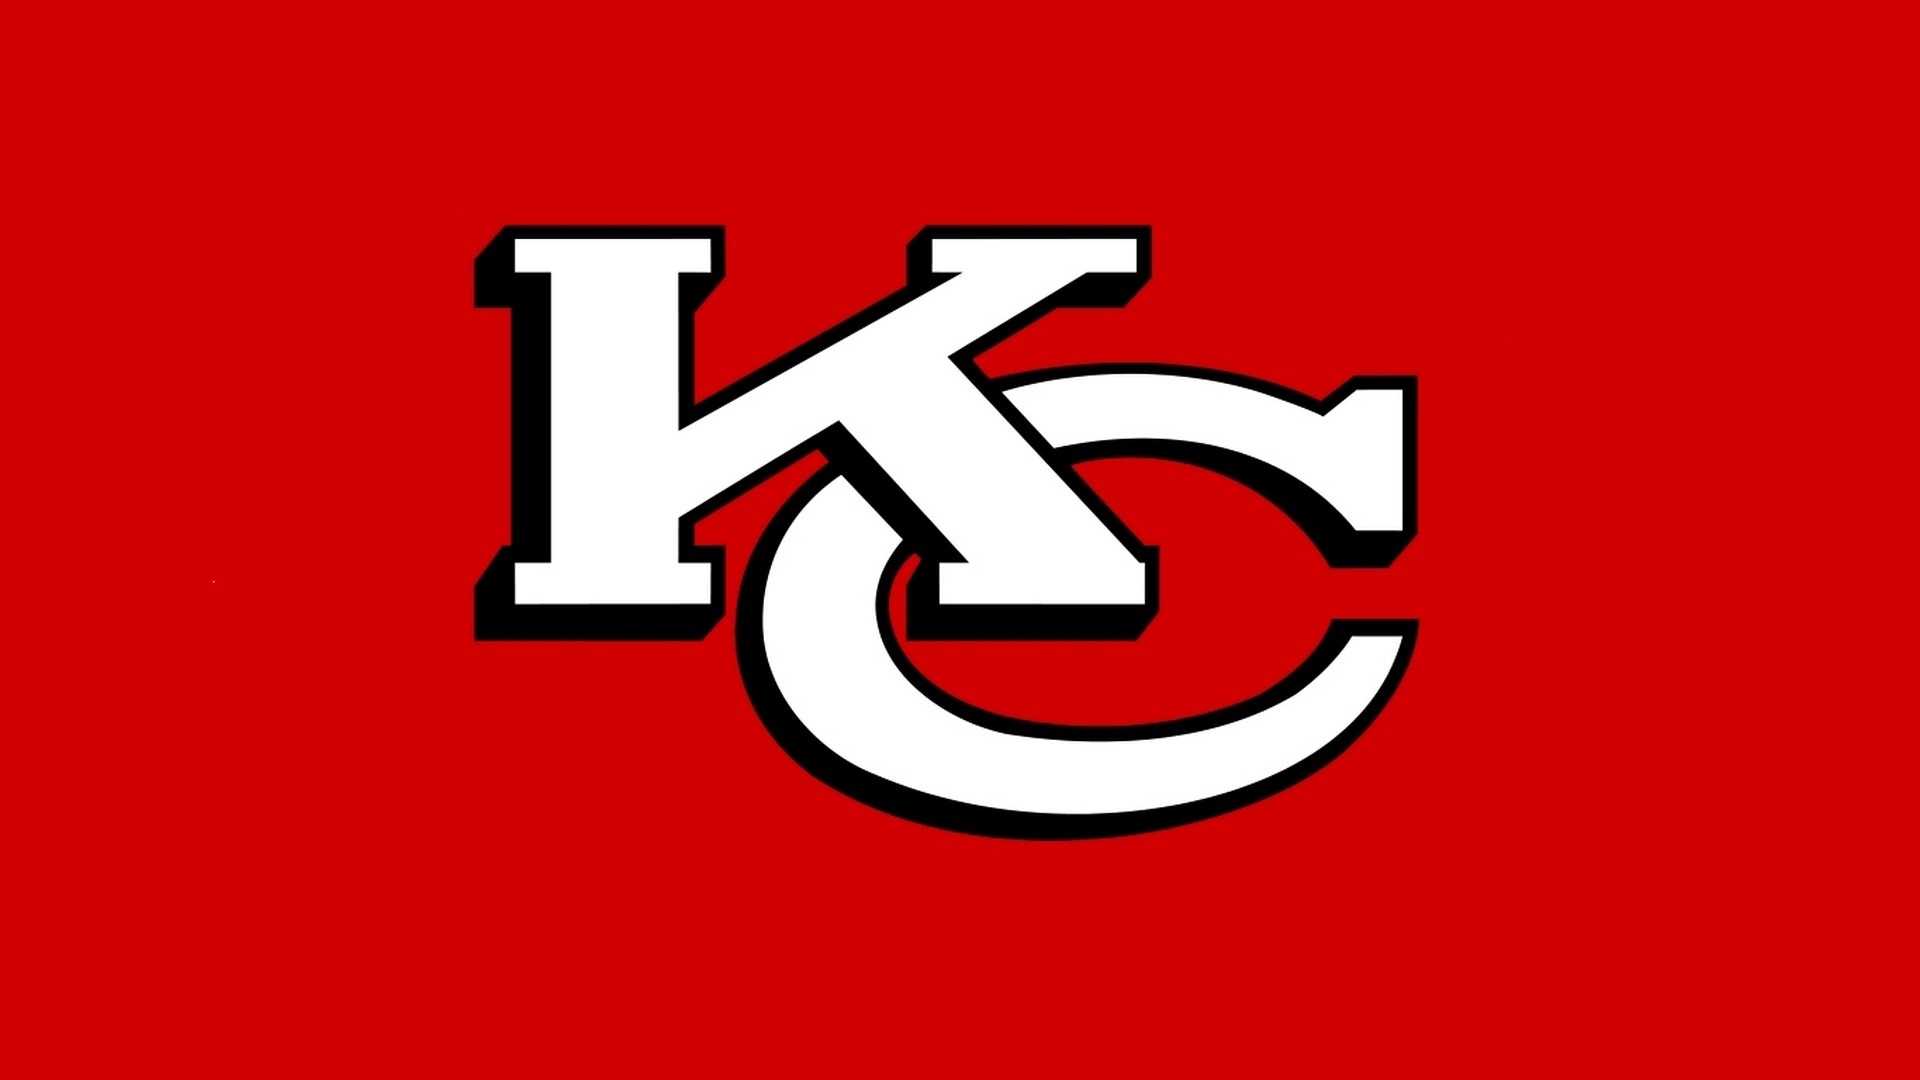 Kansas City Chiefs NFL Backgrounds HD With high-resolution 1920X1080 pixel. You can use this wallpaper for your Mac or Windows Desktop Background, iPhone, Android or Tablet and another Smartphone device